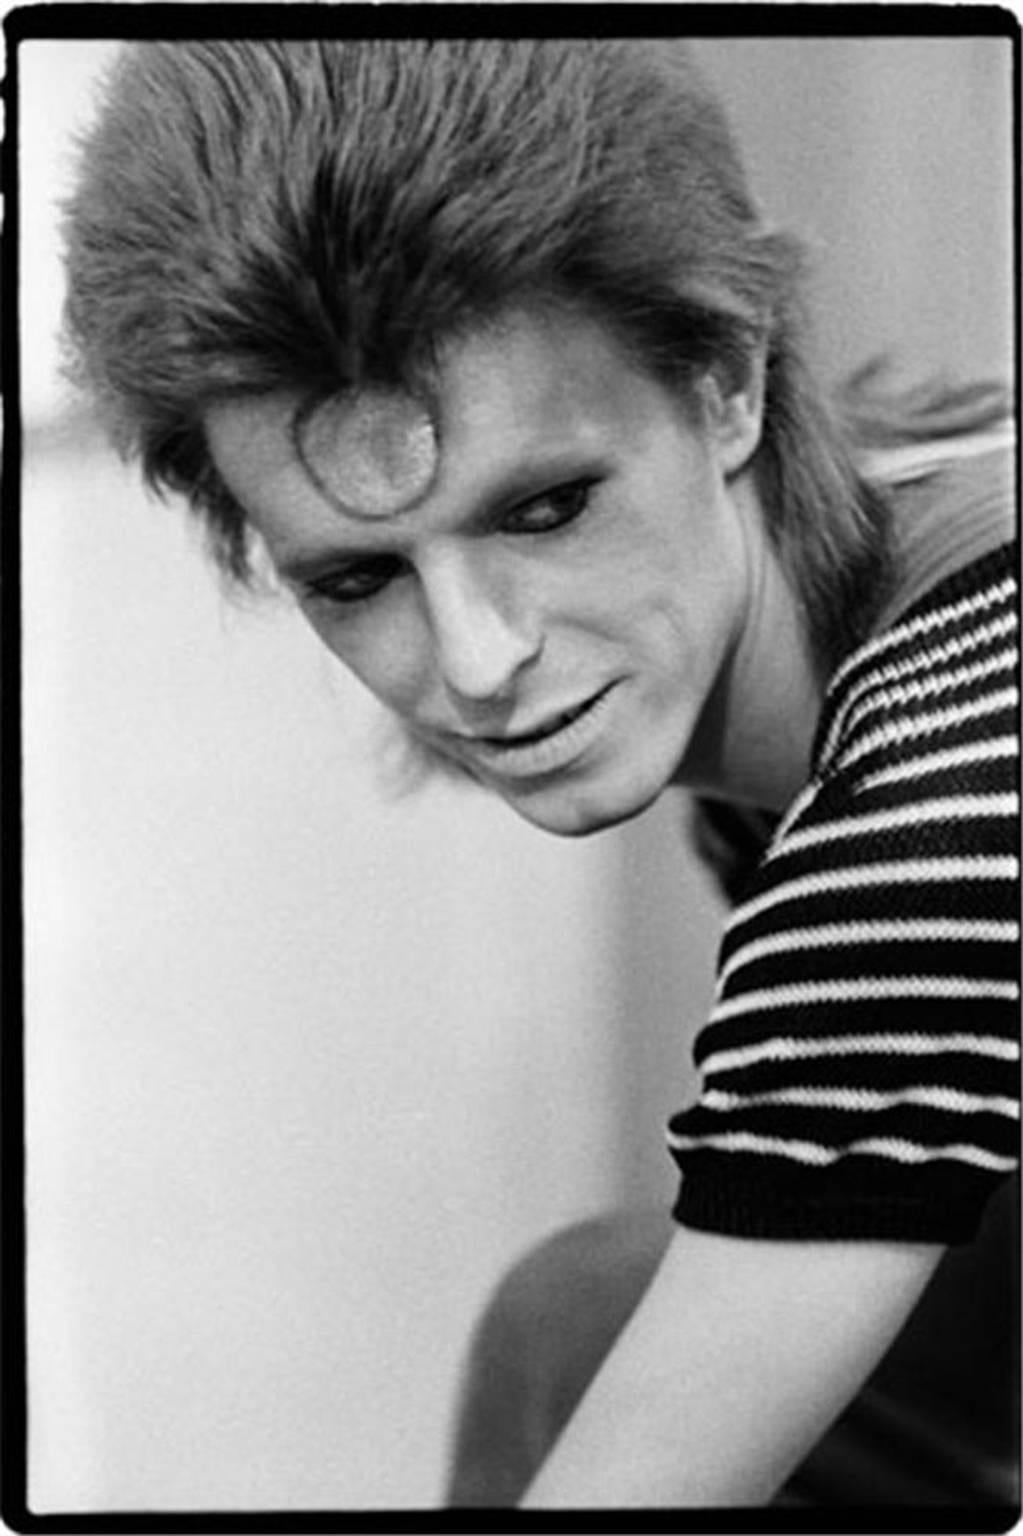 Mick Rock Black and White Photograph - David Bowie 1973